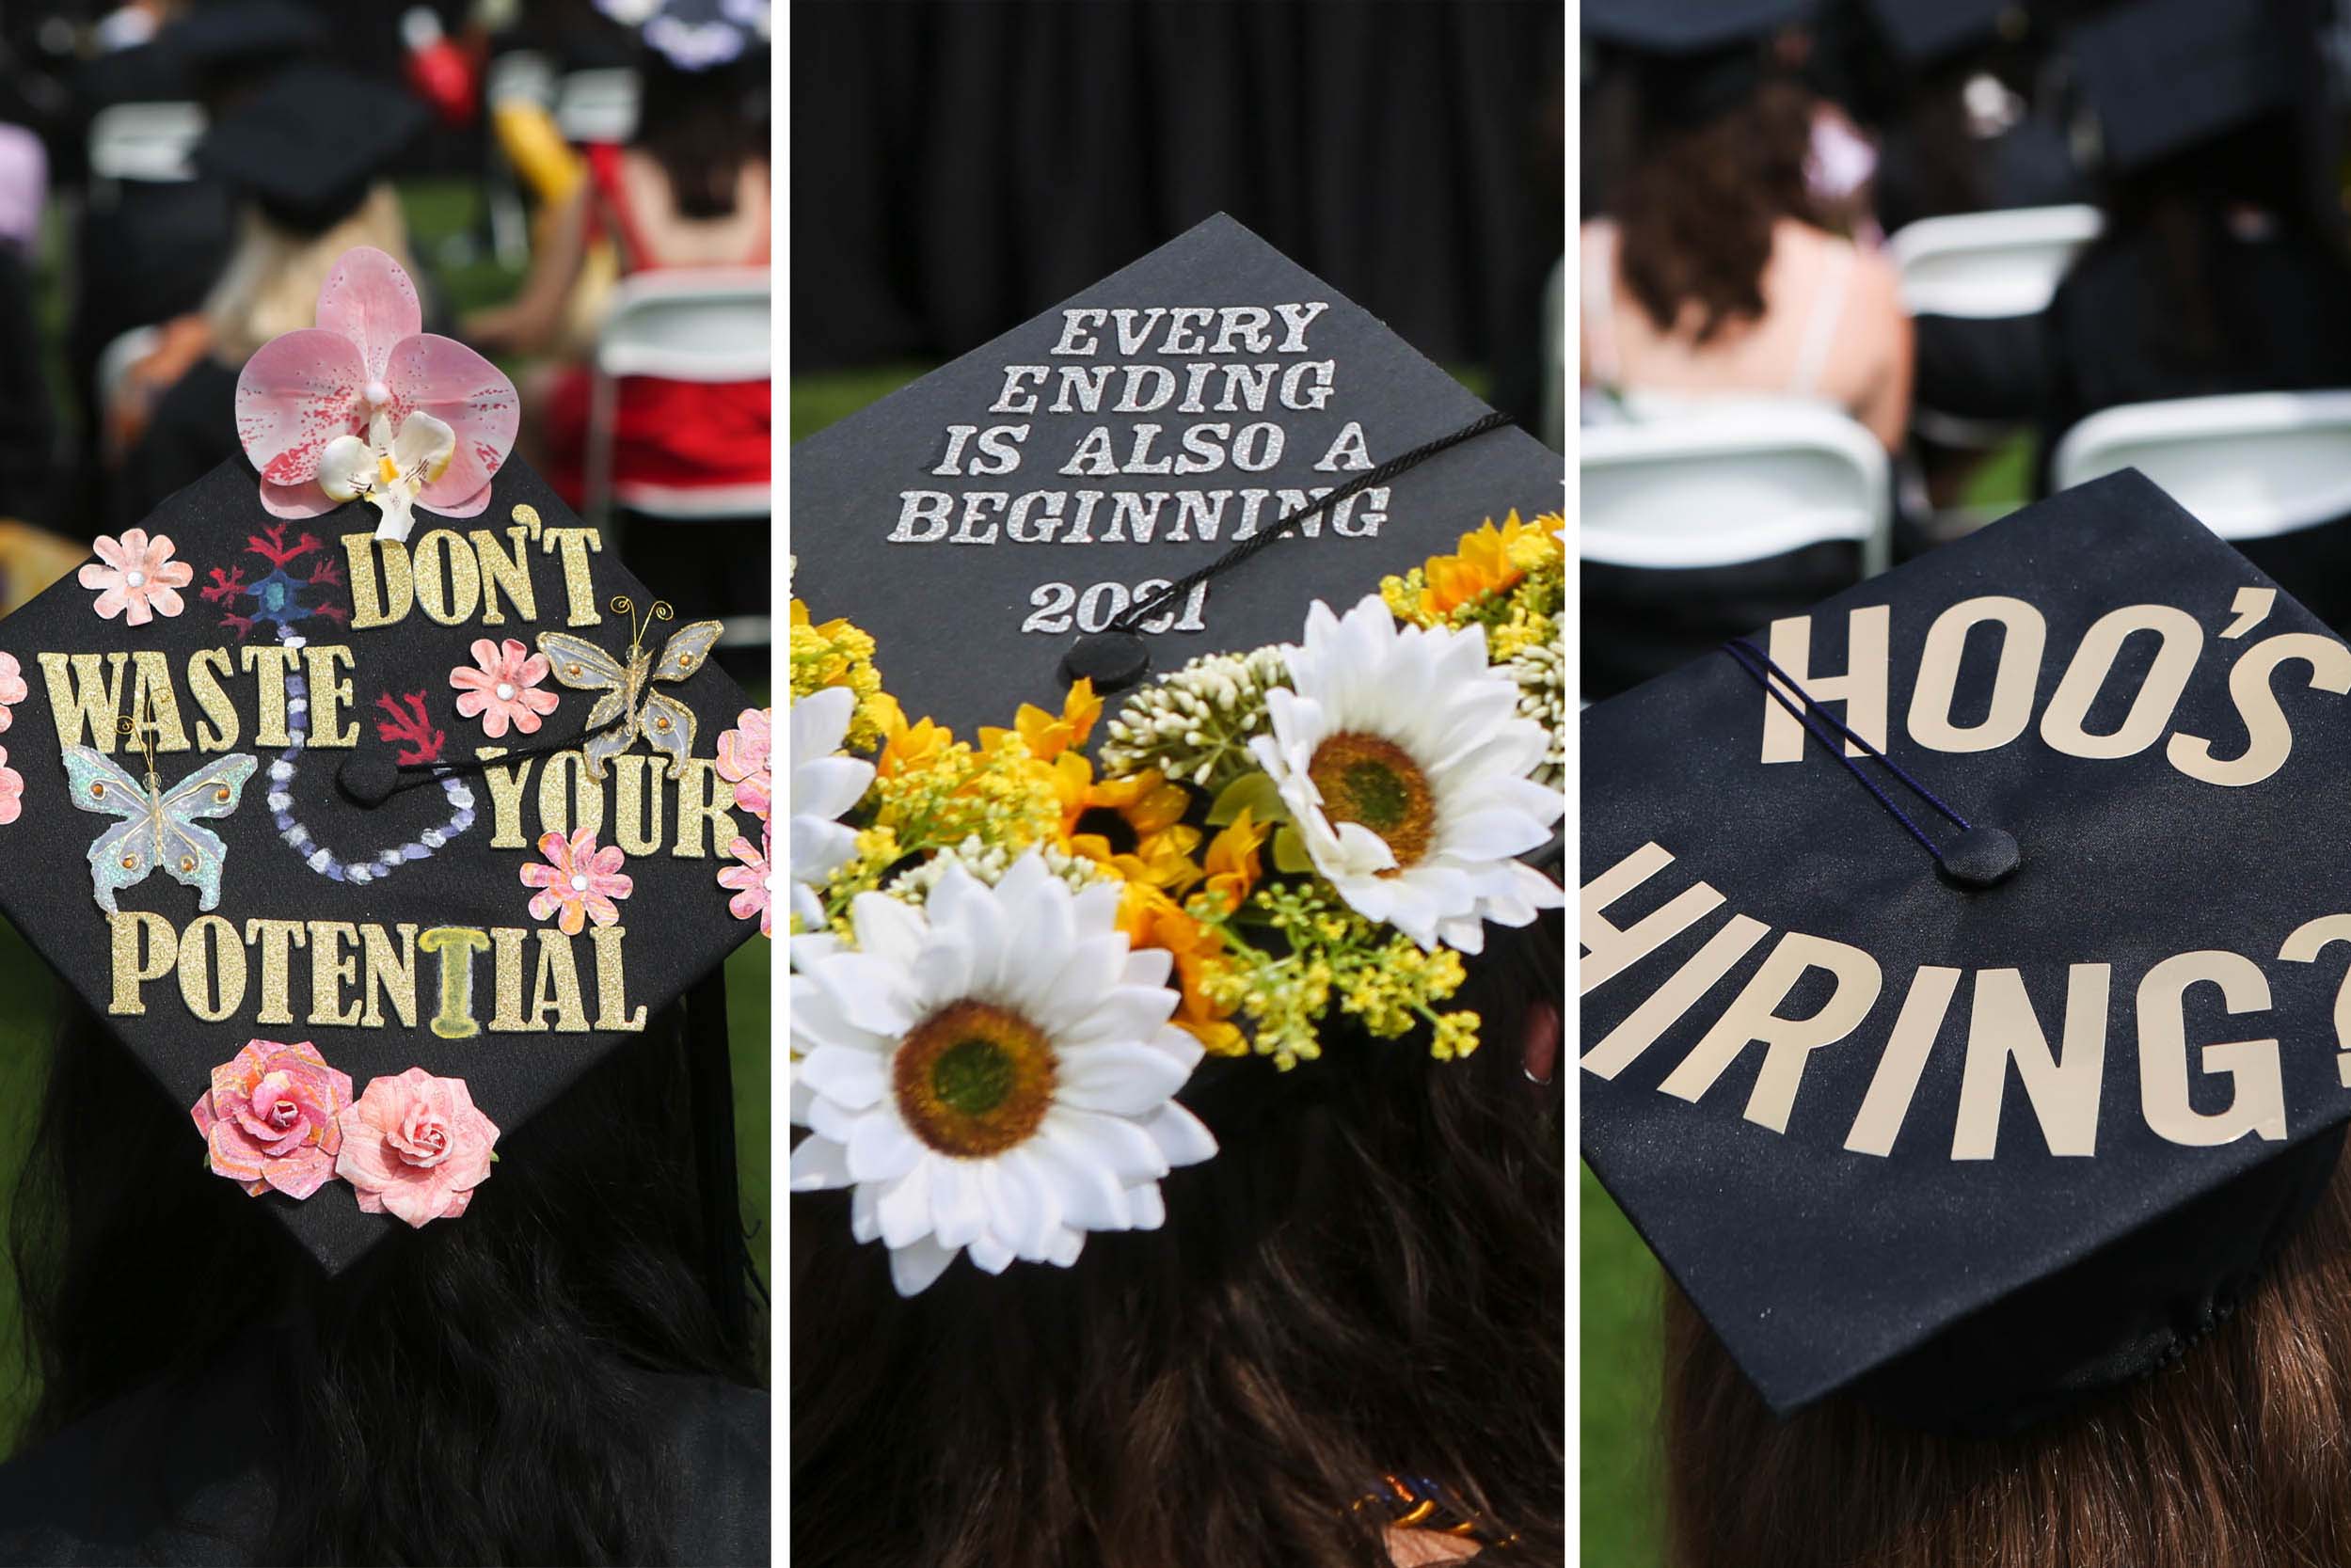 Three graduation caps that read (left to right): Don't waste your potential, Every ending is also a beginning 2021, Hoo's Hiring?